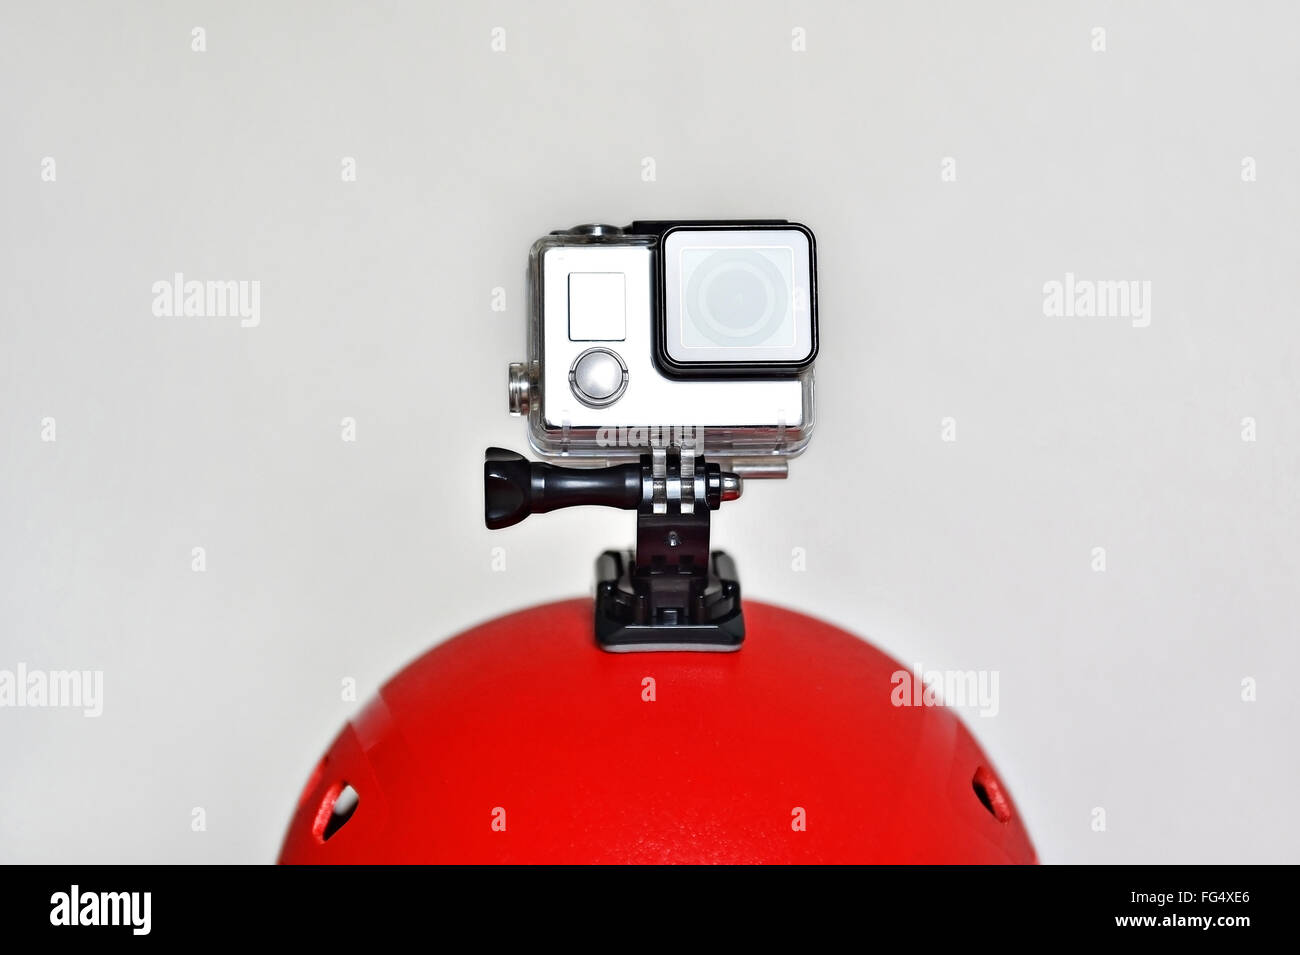 Detail shot with action camera mounted on a red sports helmet Stock Photo